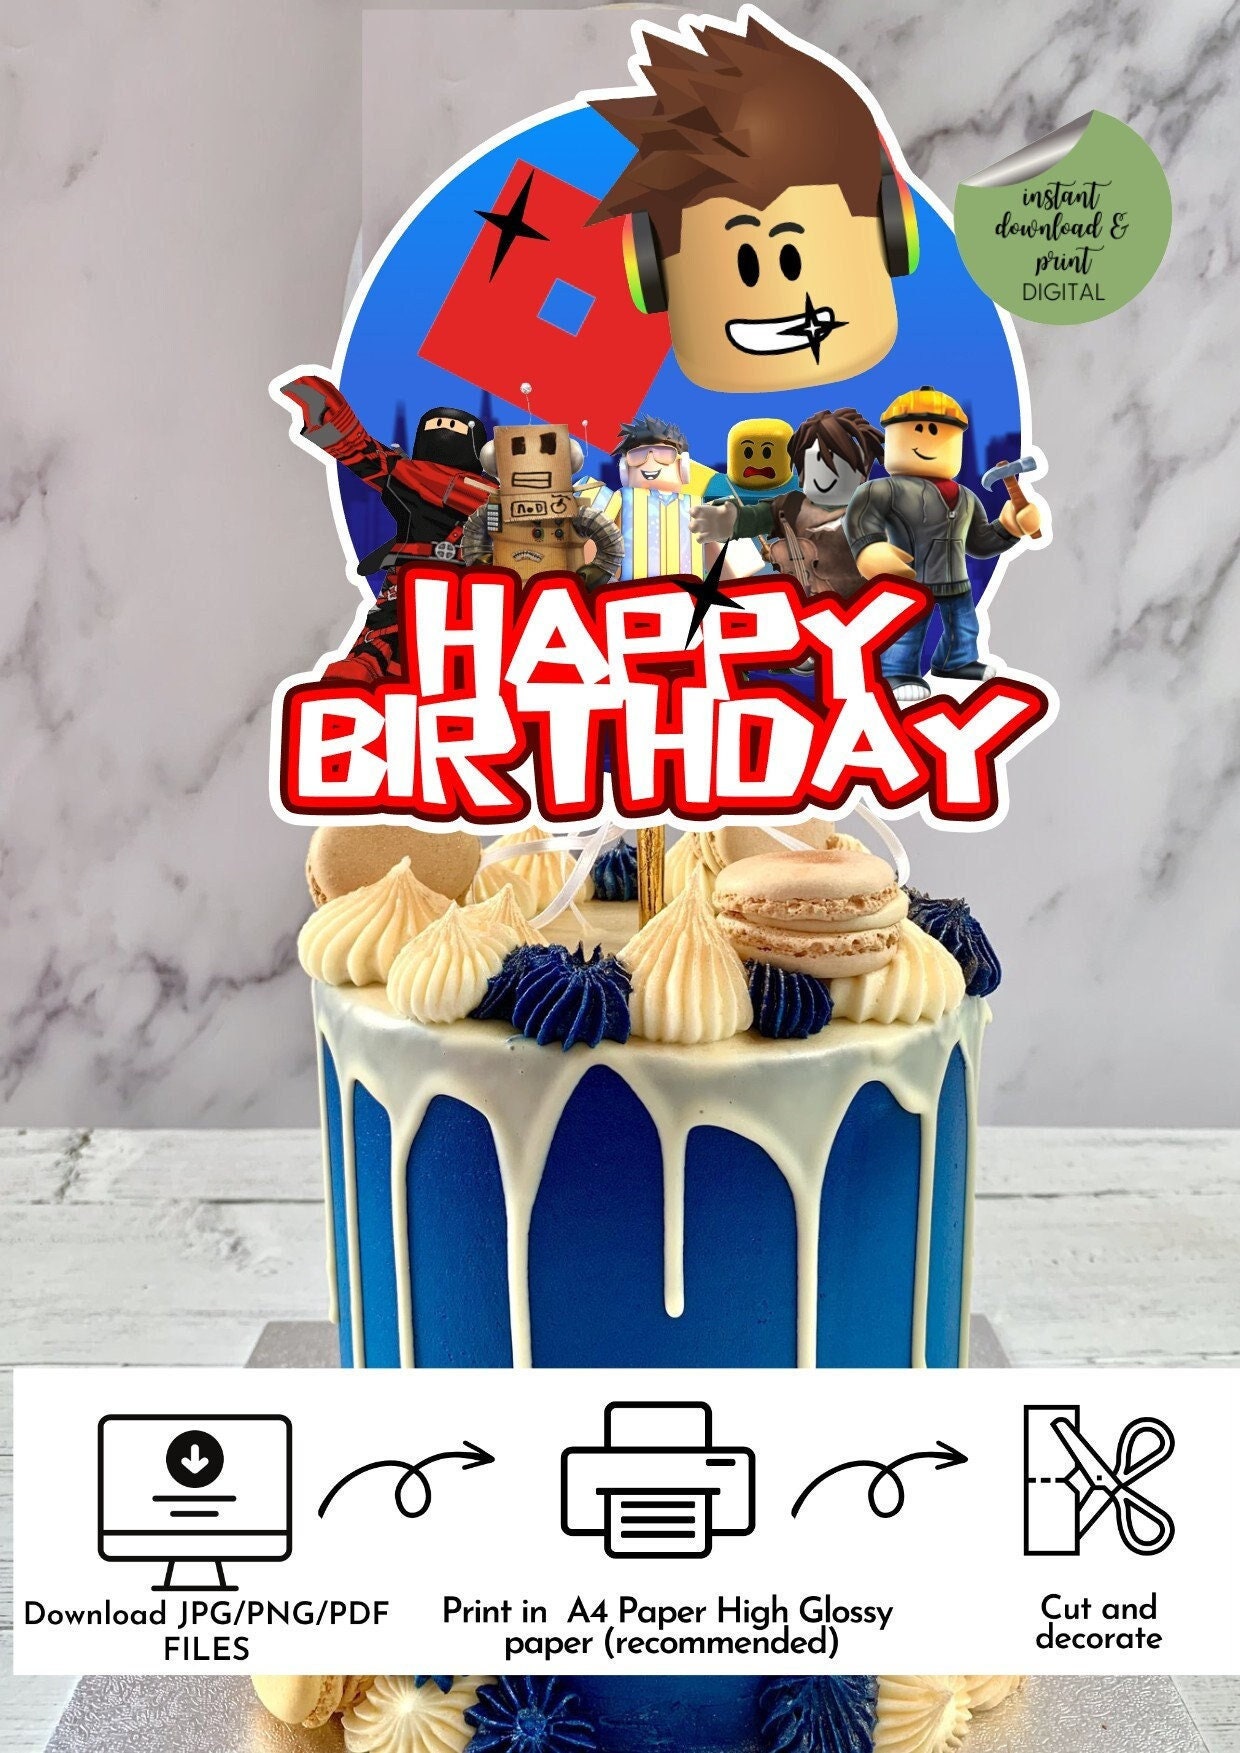 Roblox 3D Doors Character Cake Topper Personalised Name and 